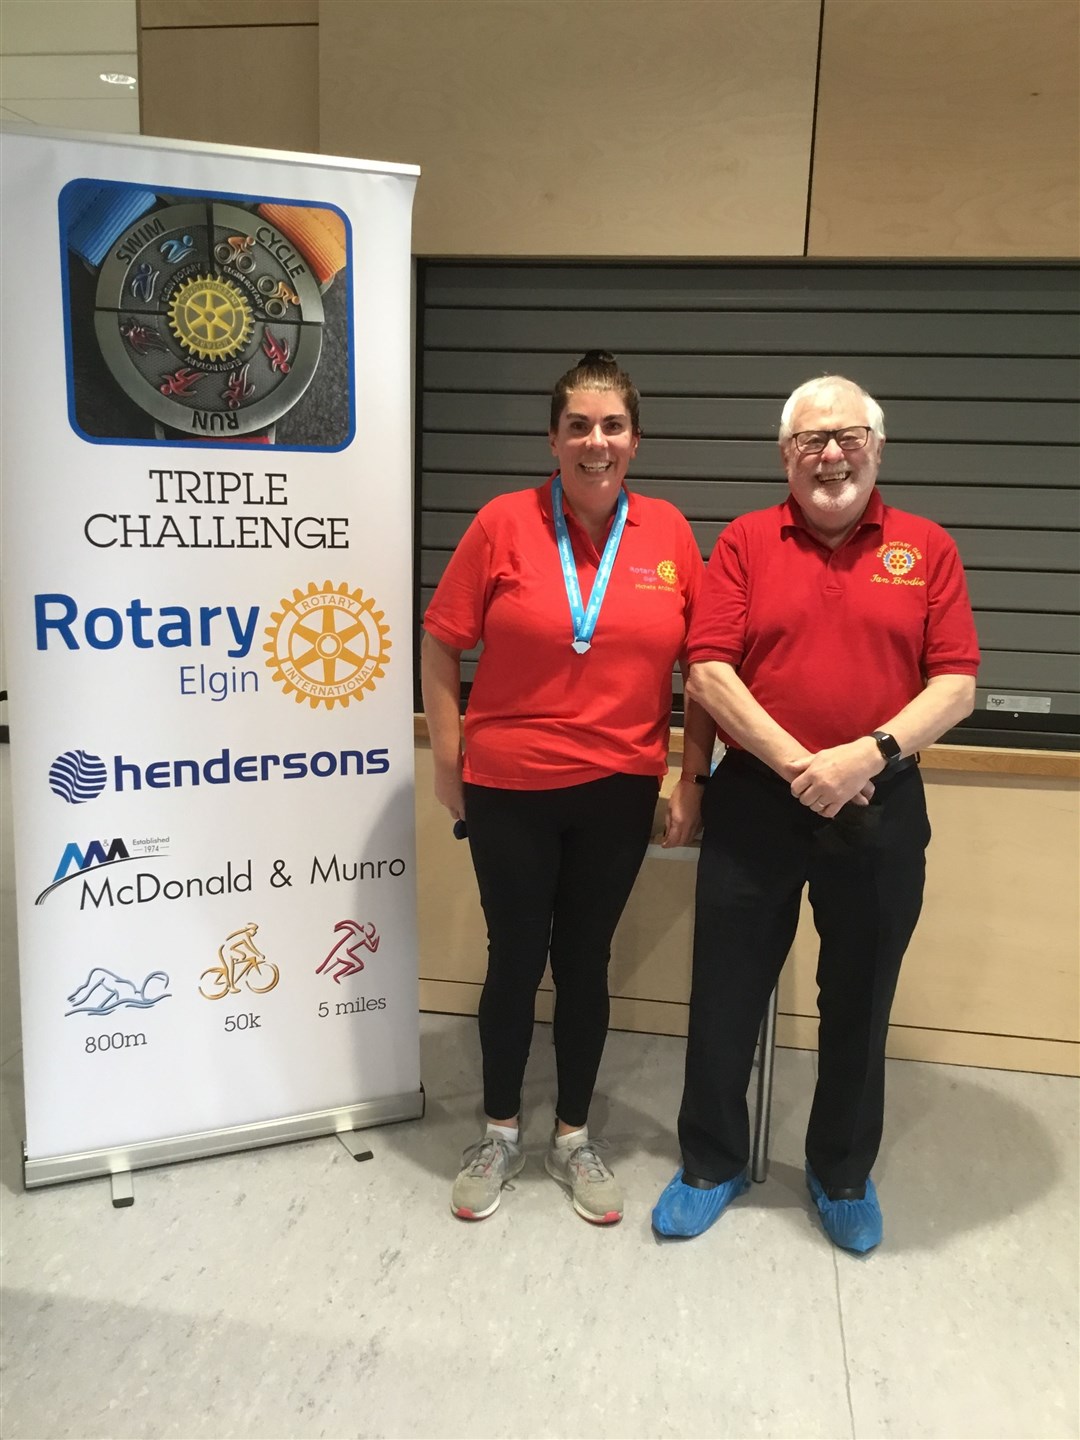 Rotary Elgin's club secretary Michelle Anderson completed the challenge.